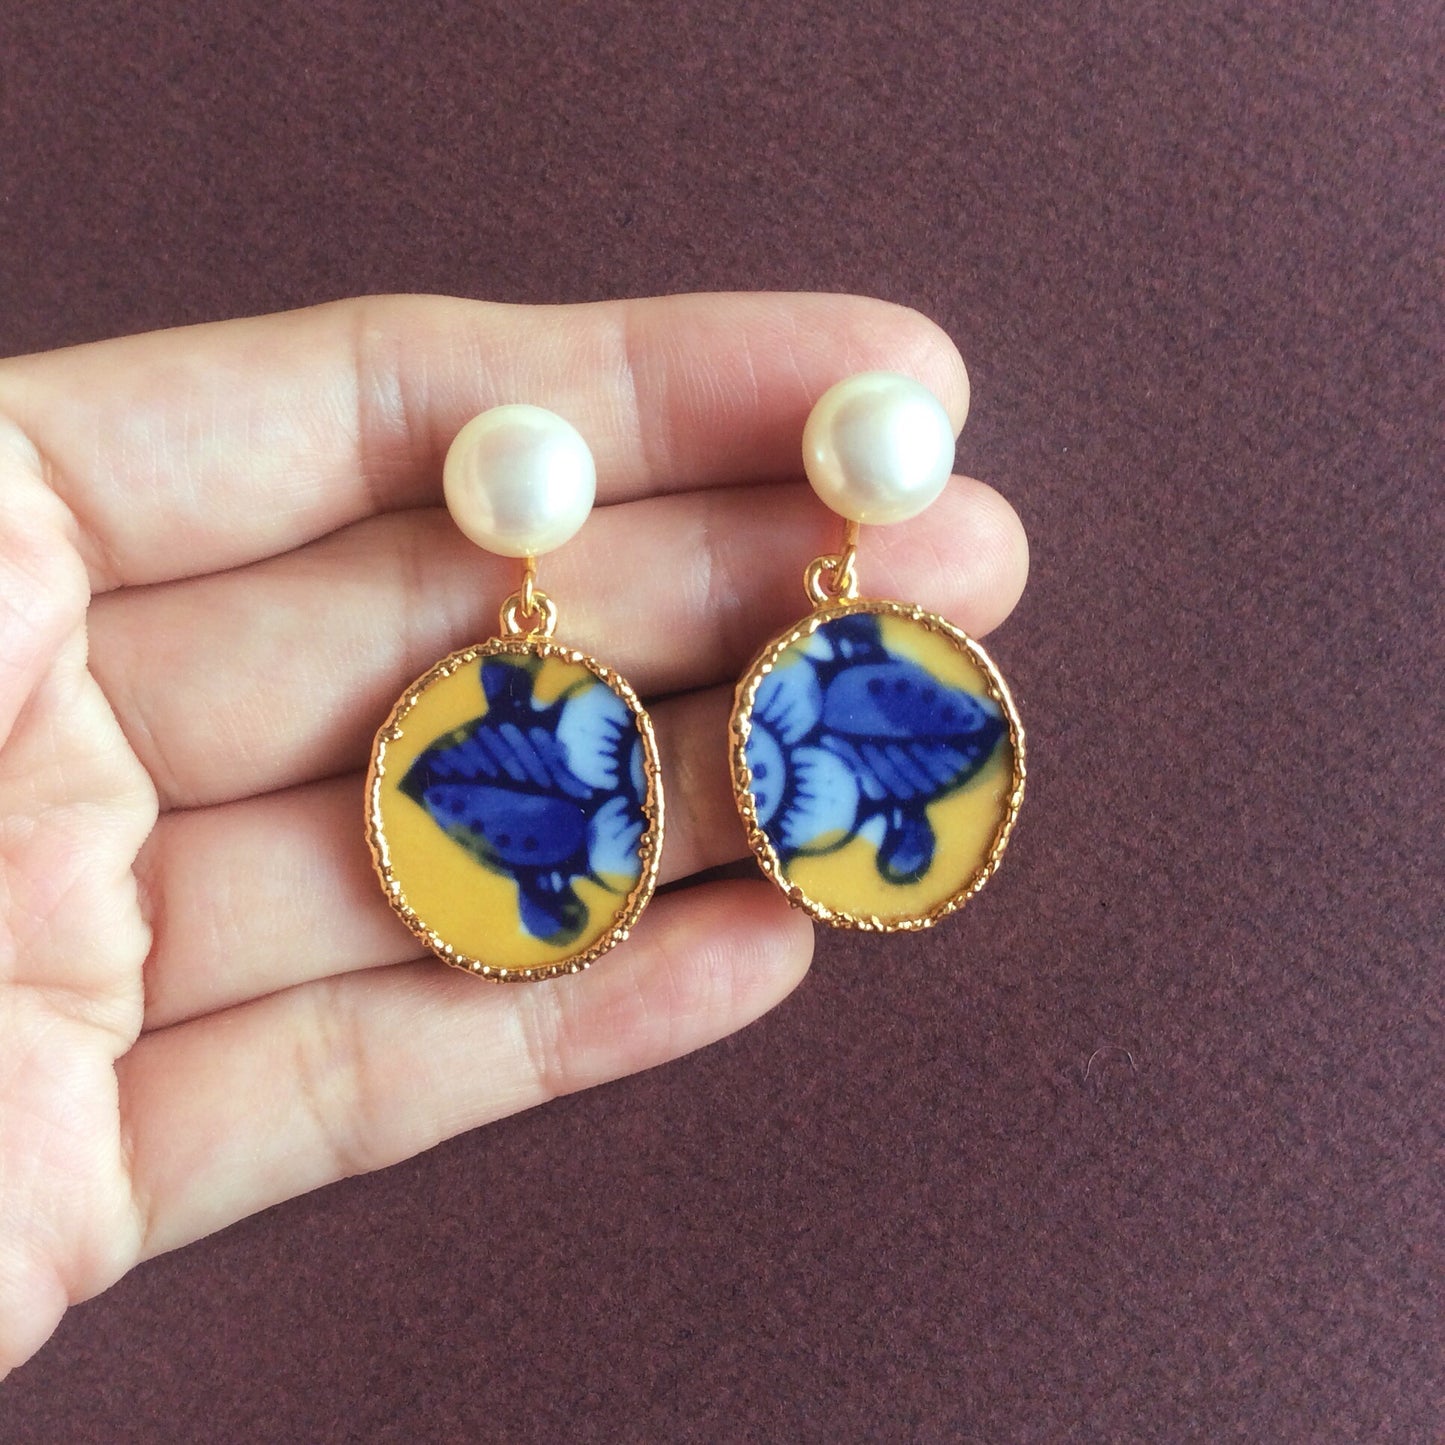 Blue and yellow porcelain earrings with freshwater pearl studs